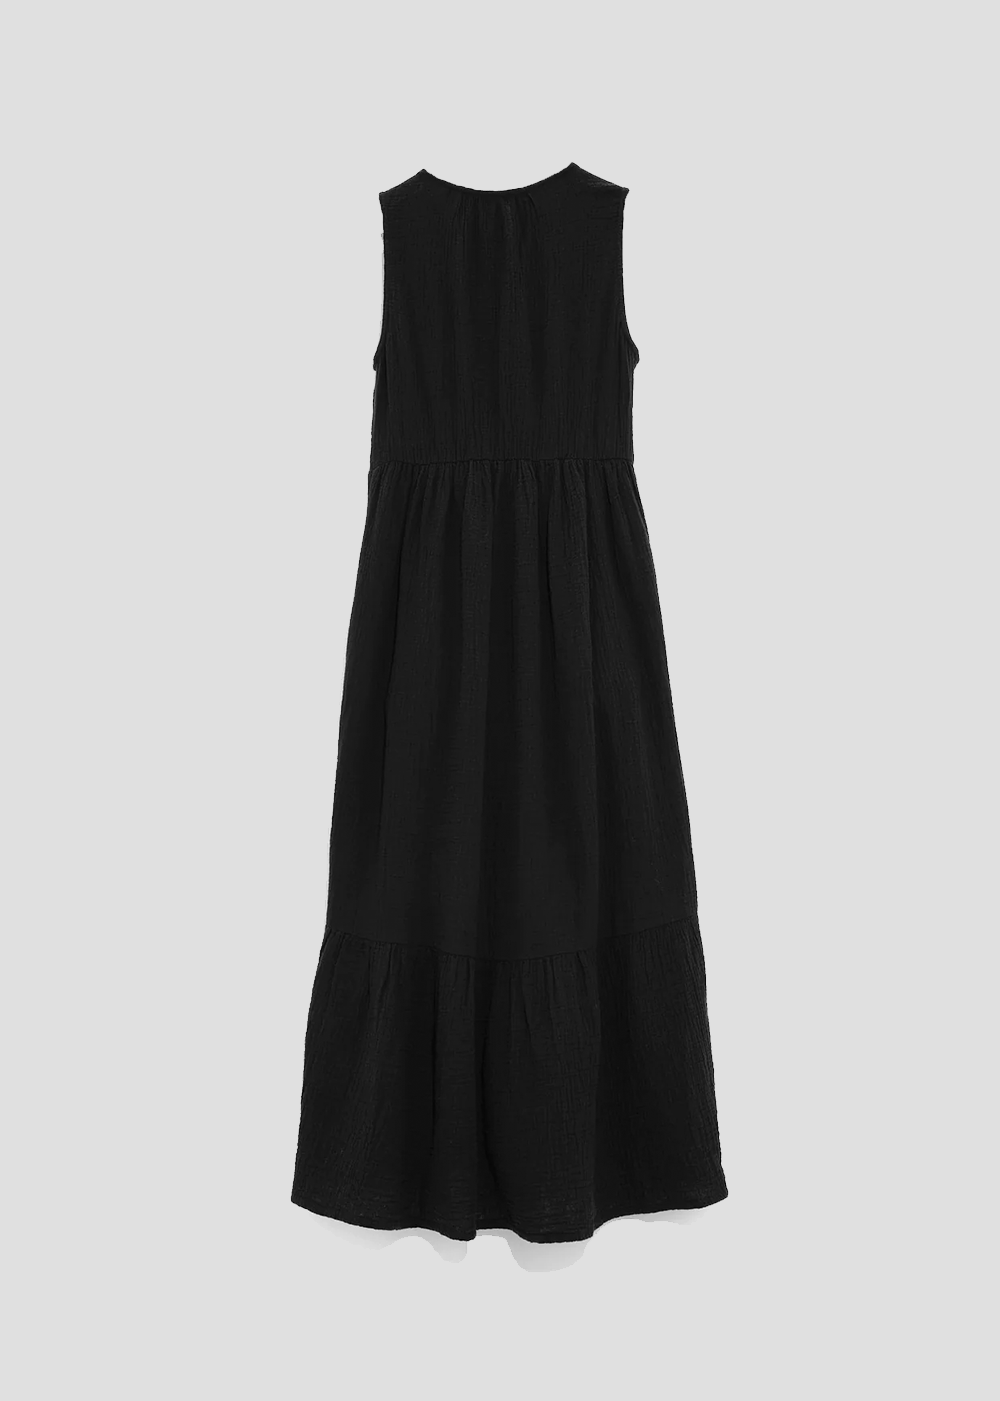 Back view of lightweight sleeveless black maxi length summer dress from Echo New York. Fit is a modern relaxed silhouette and super soft 100% cotton.